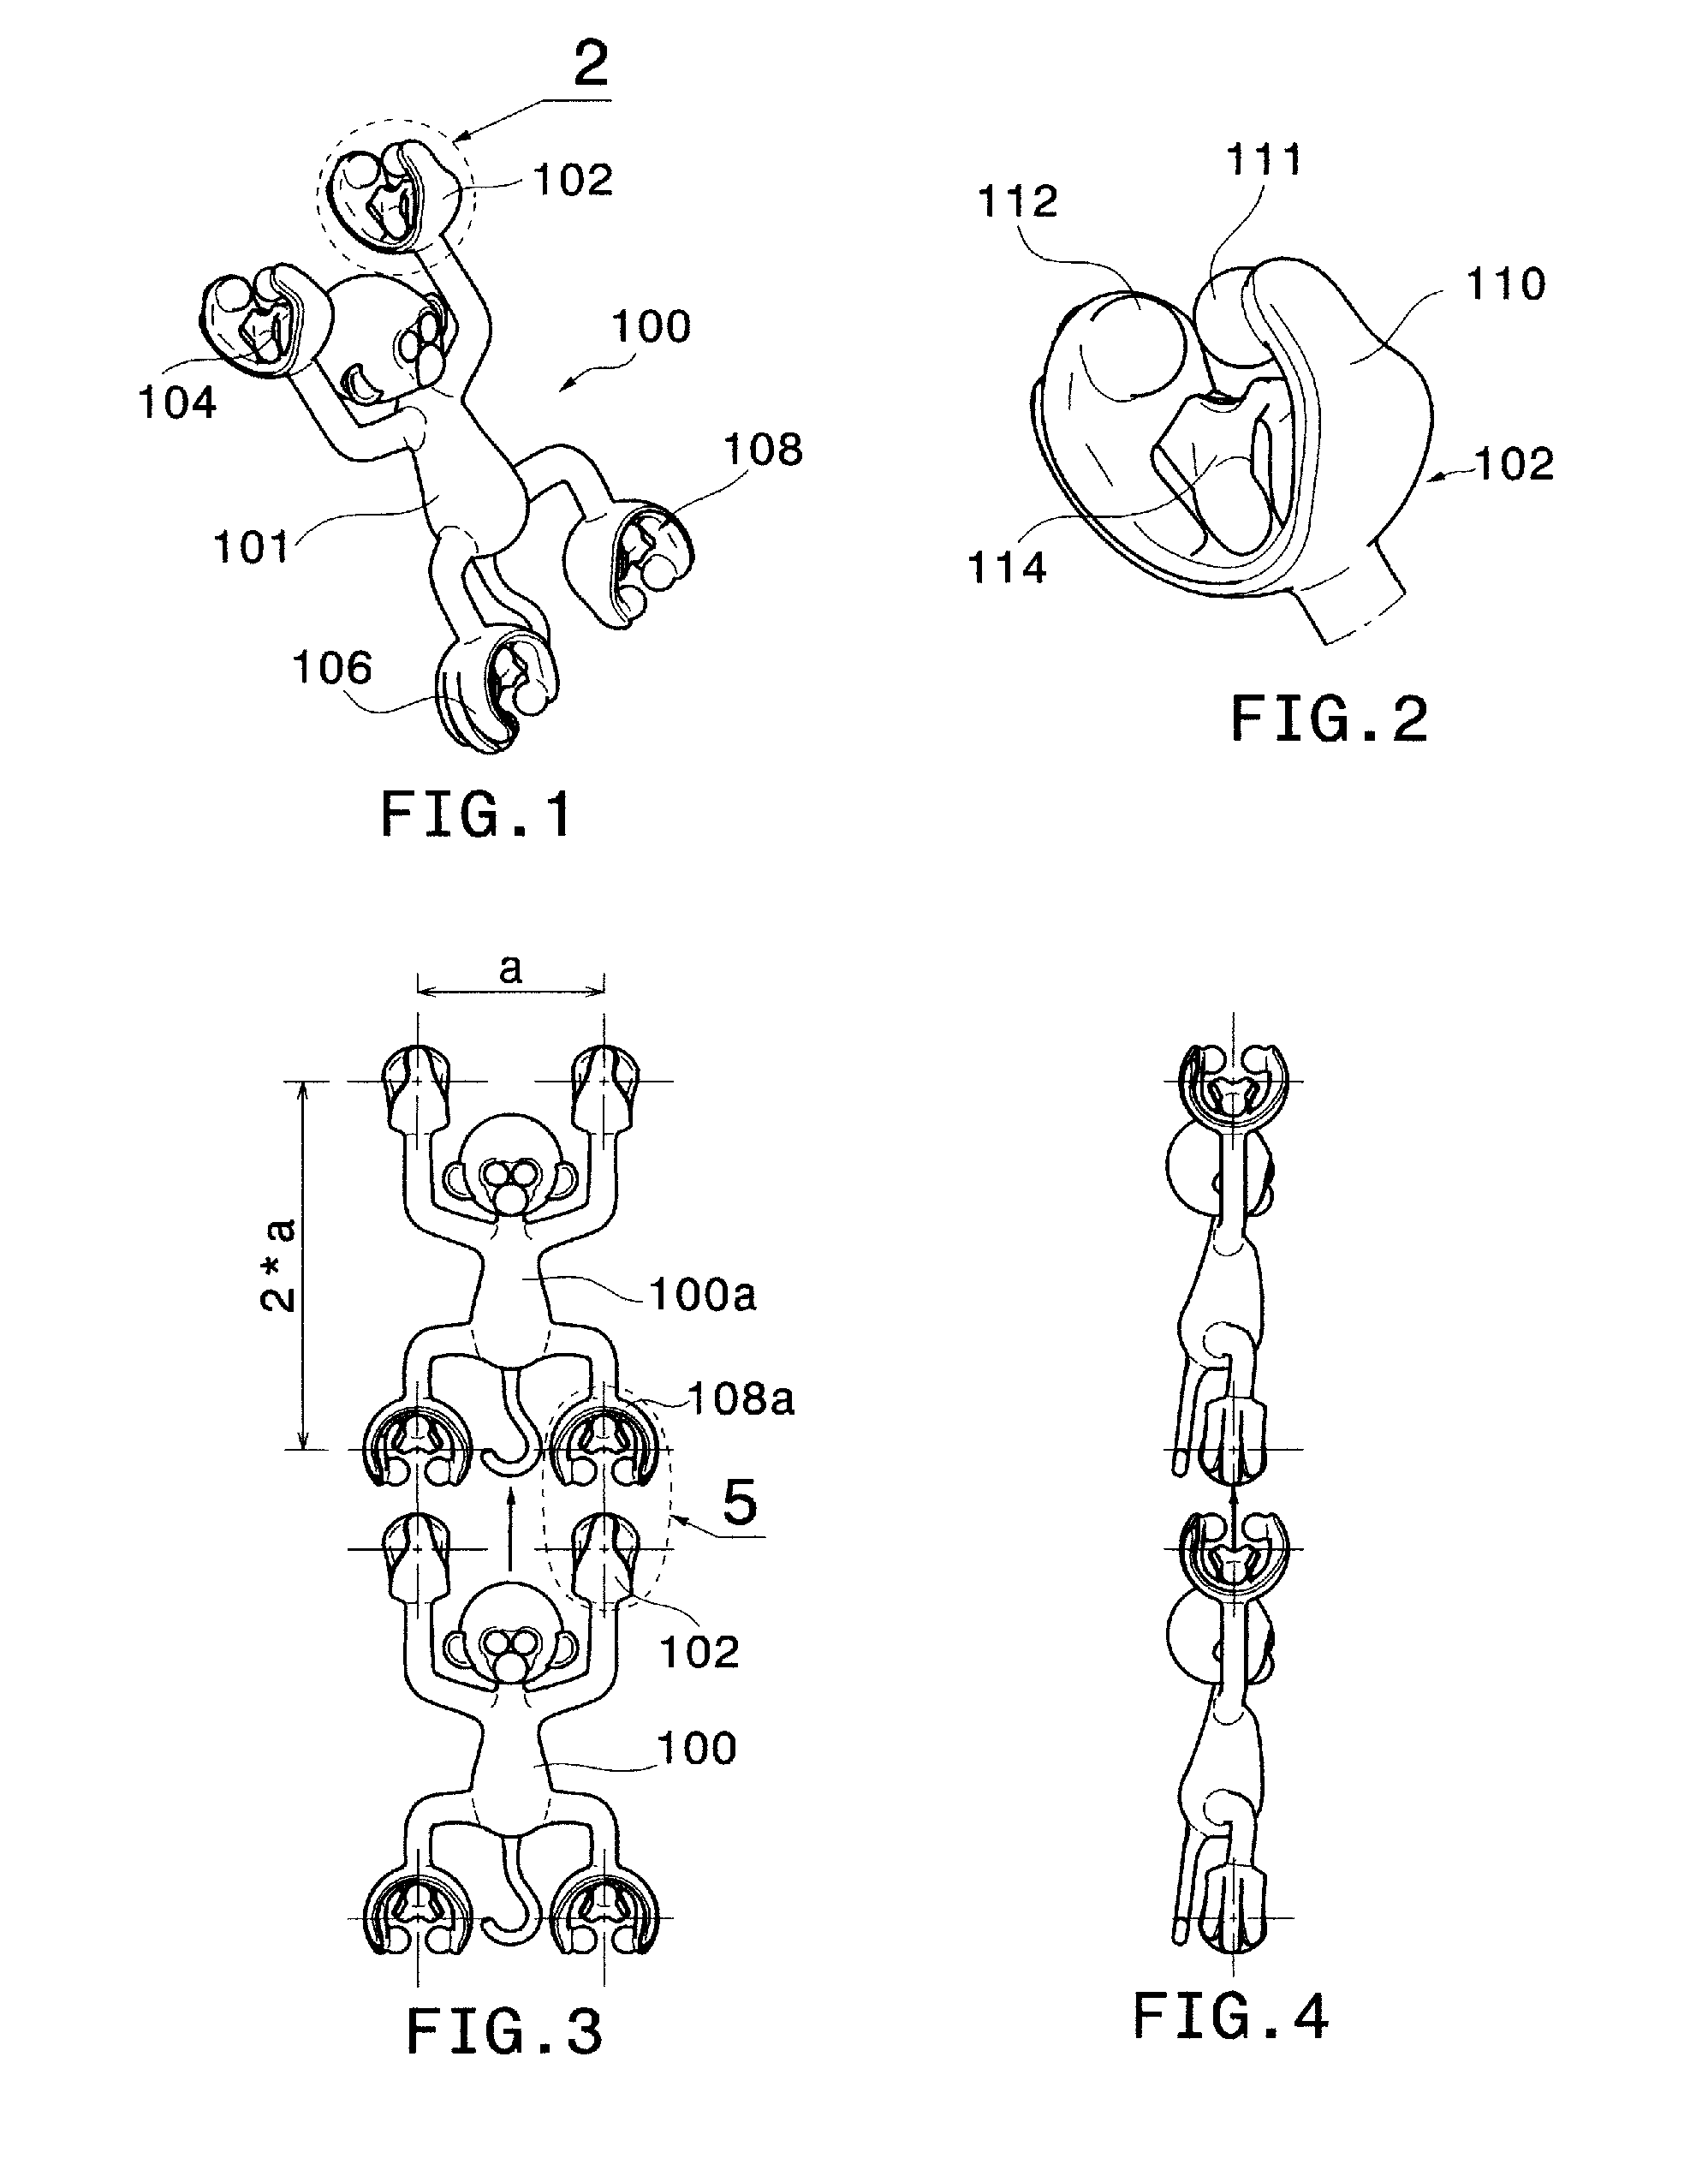 Construction system and applications thereof